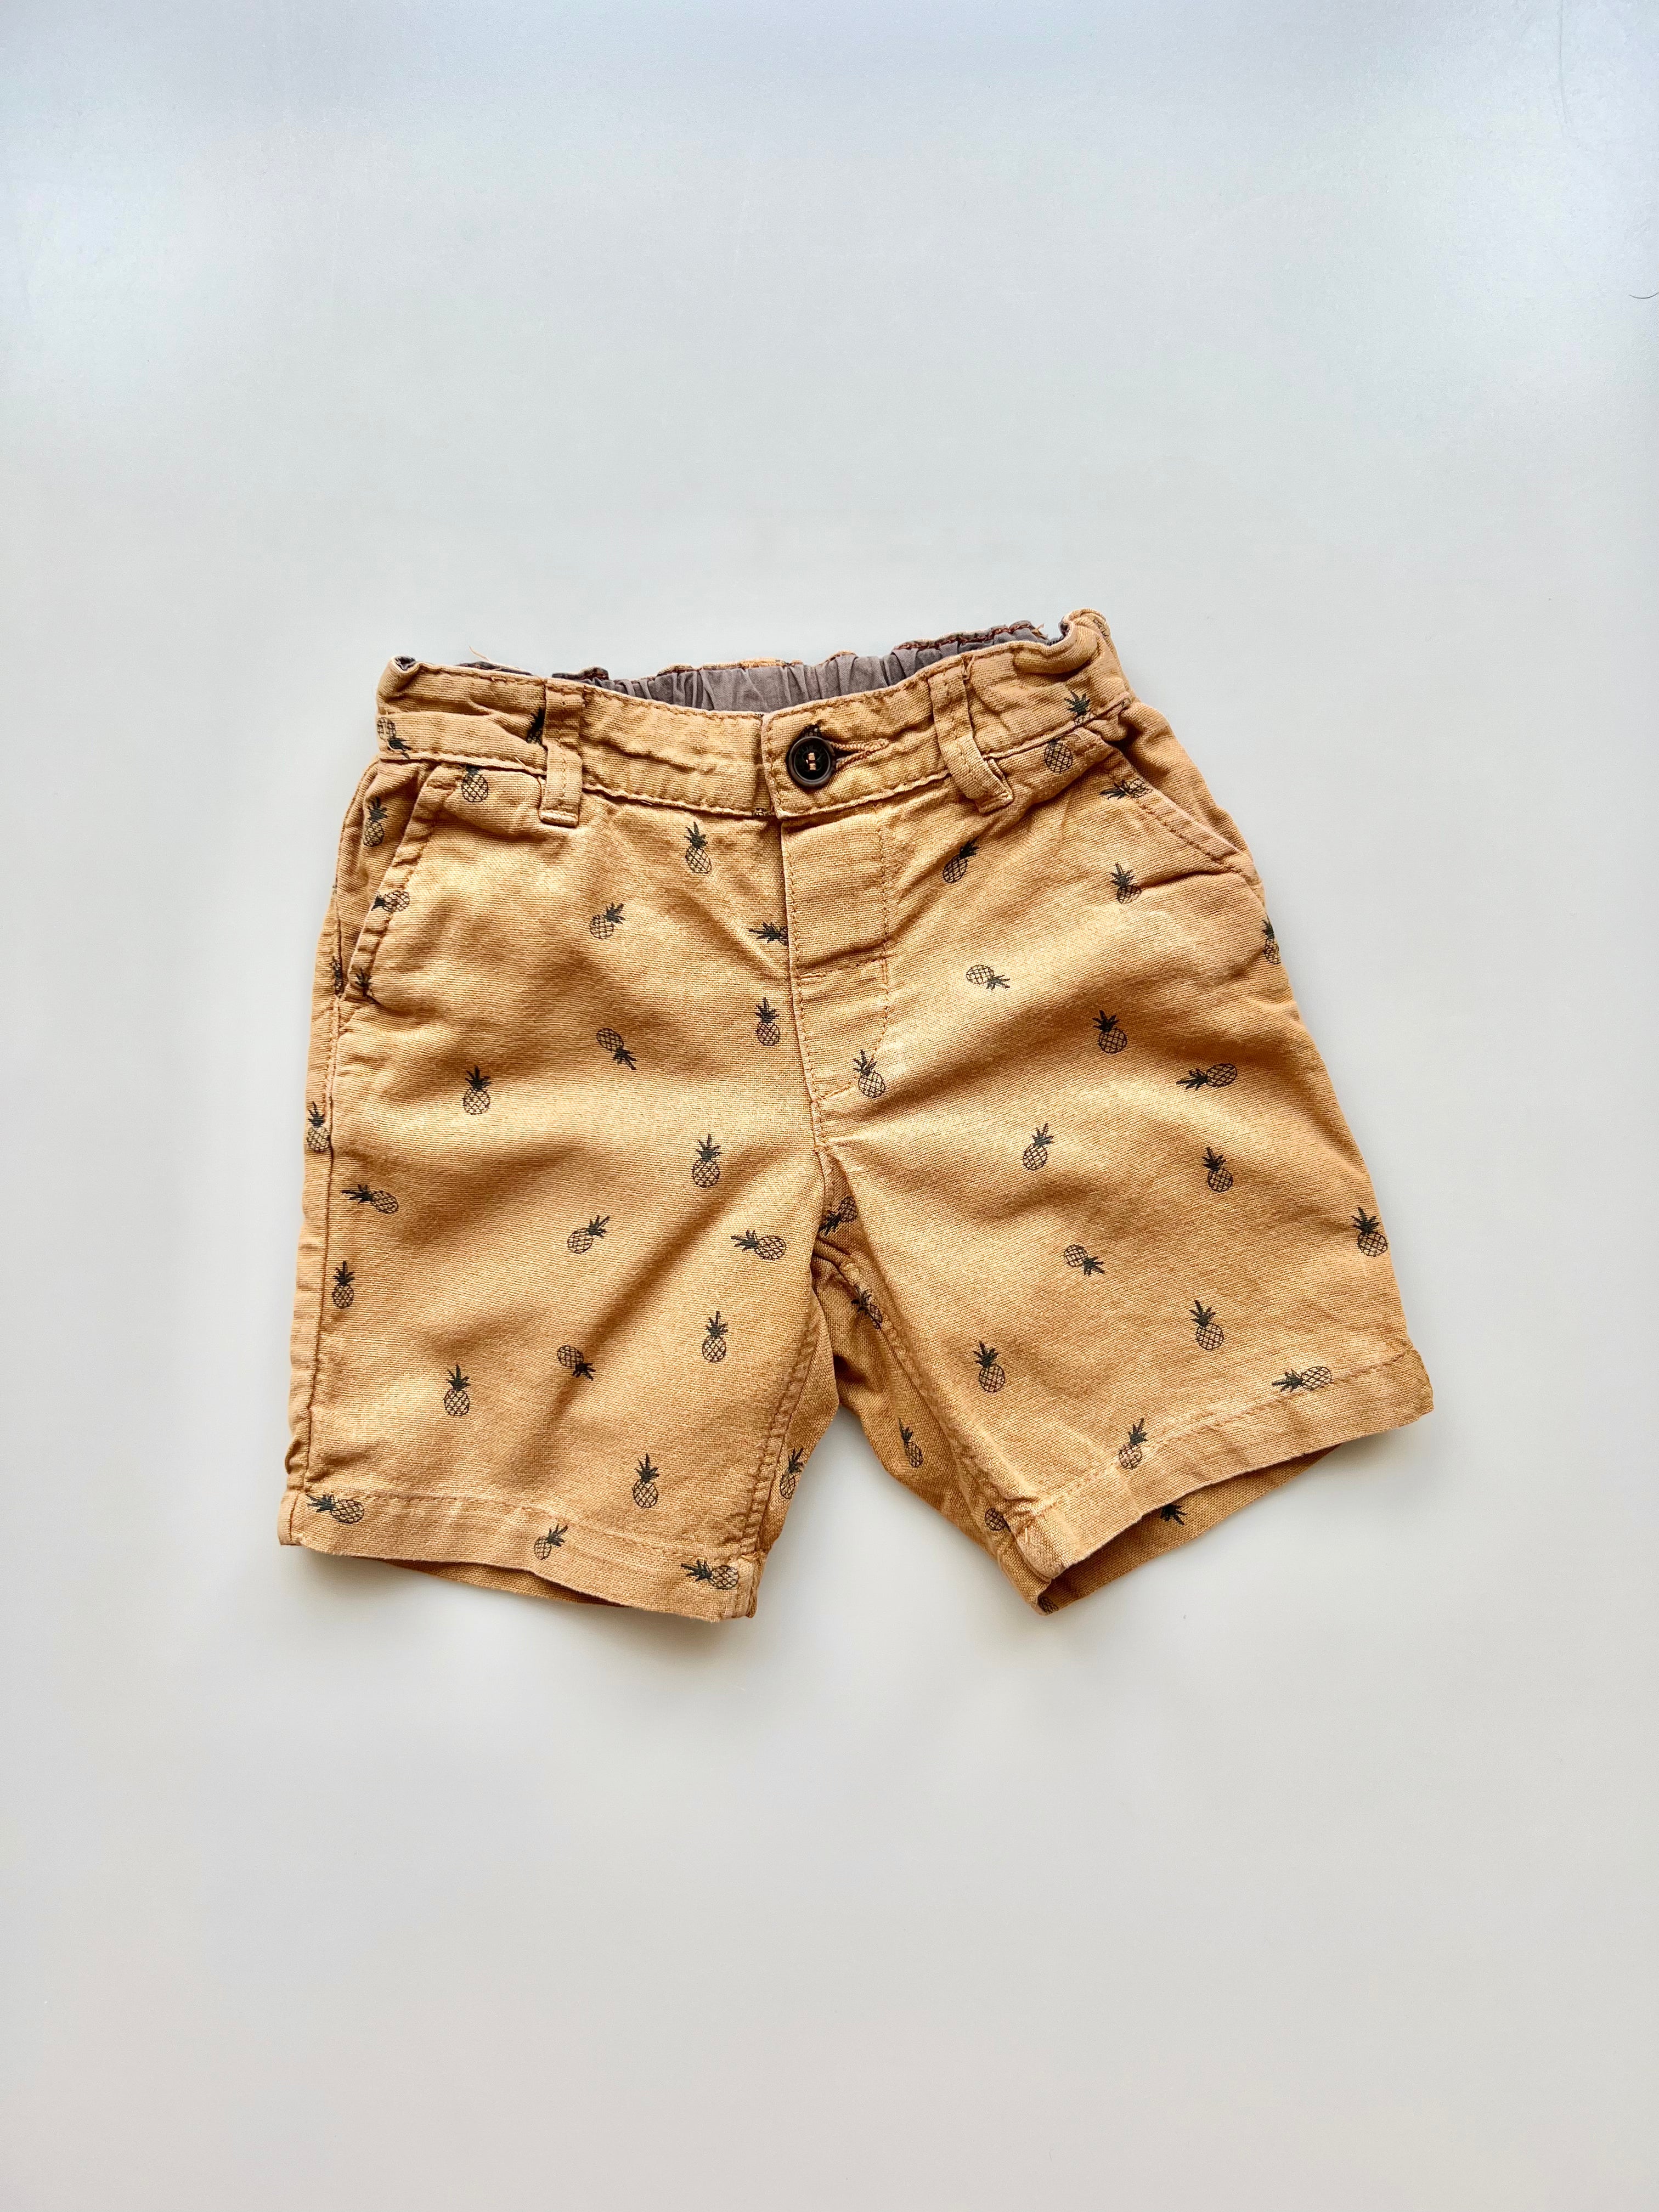 H&M Pineapple Shorts 18-24 Months